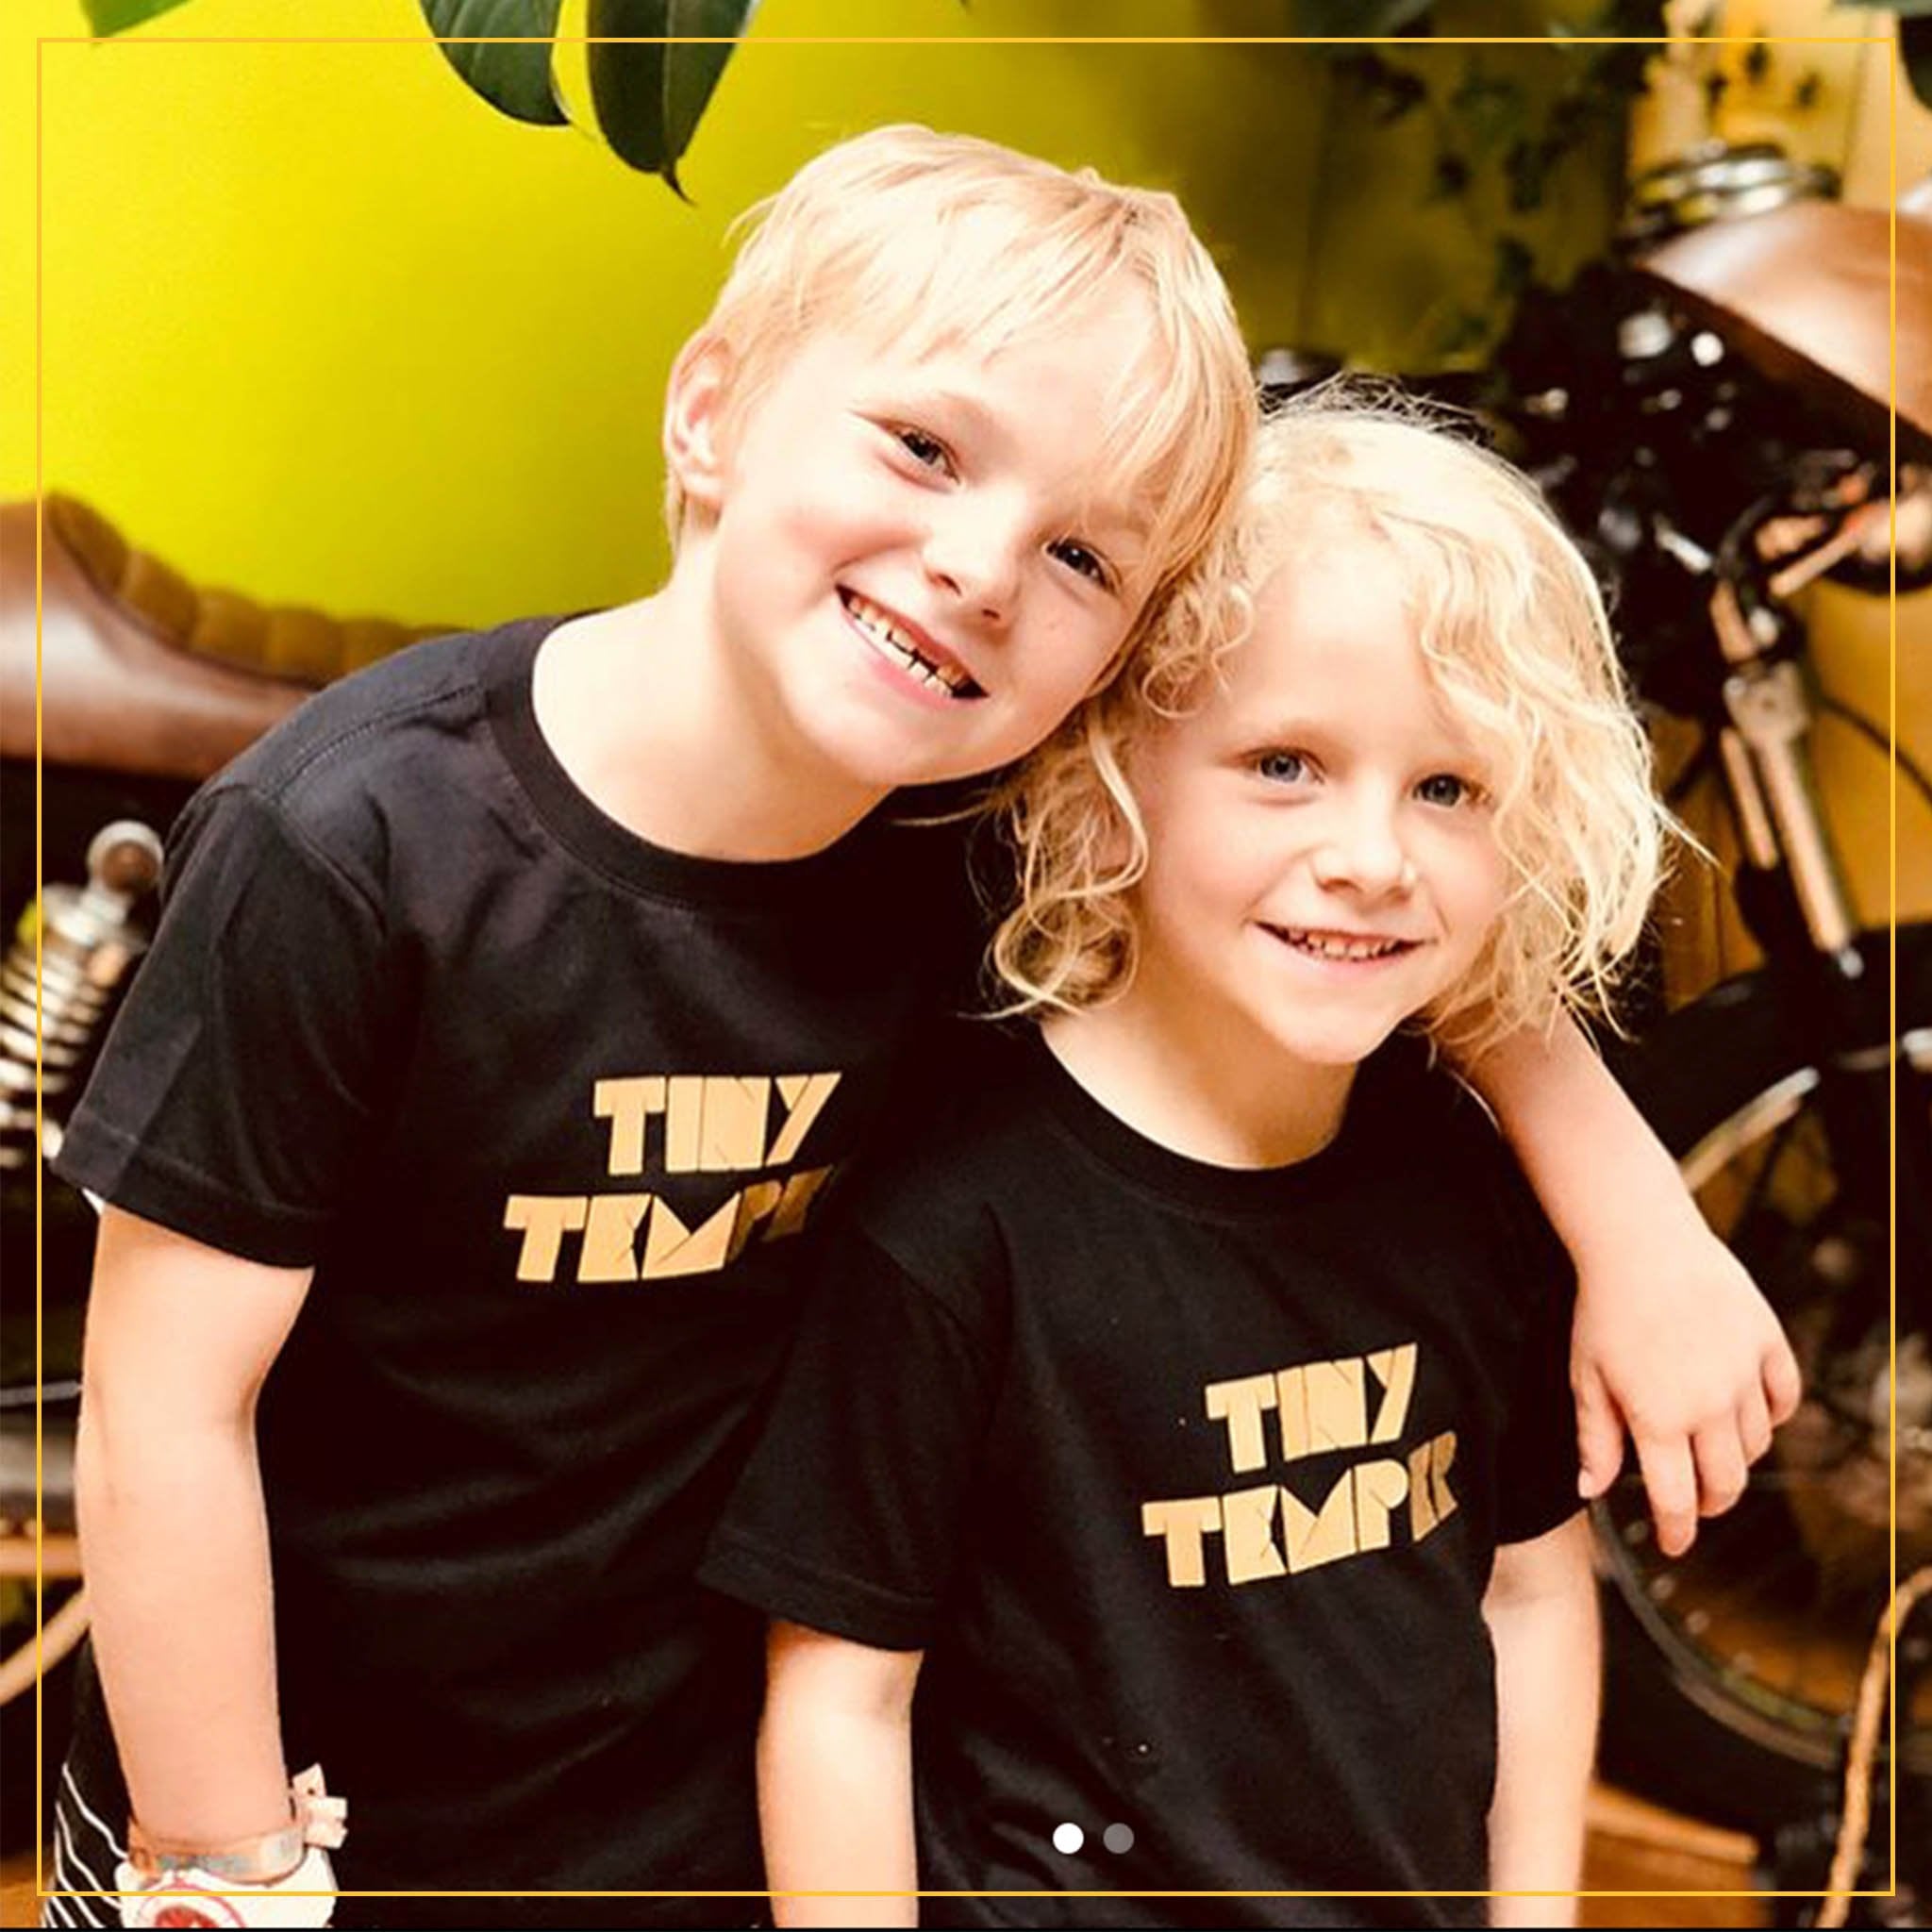 boy and girl in black novelty tees with 'tiny temper' print